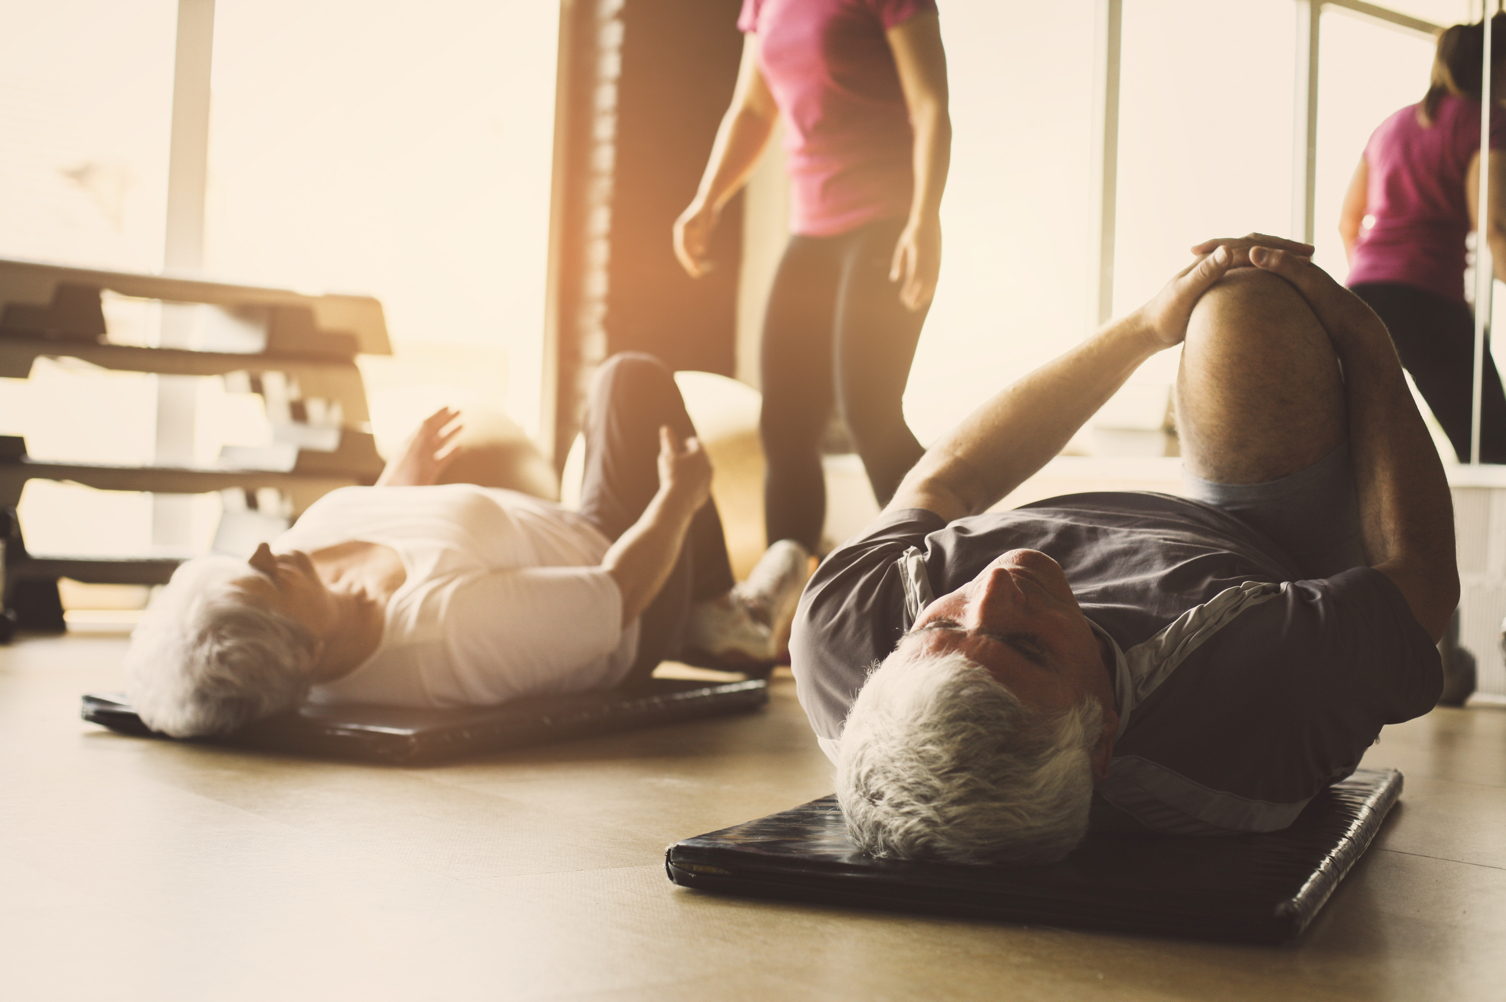 In Motion: Elderly man and woman stretching on mats